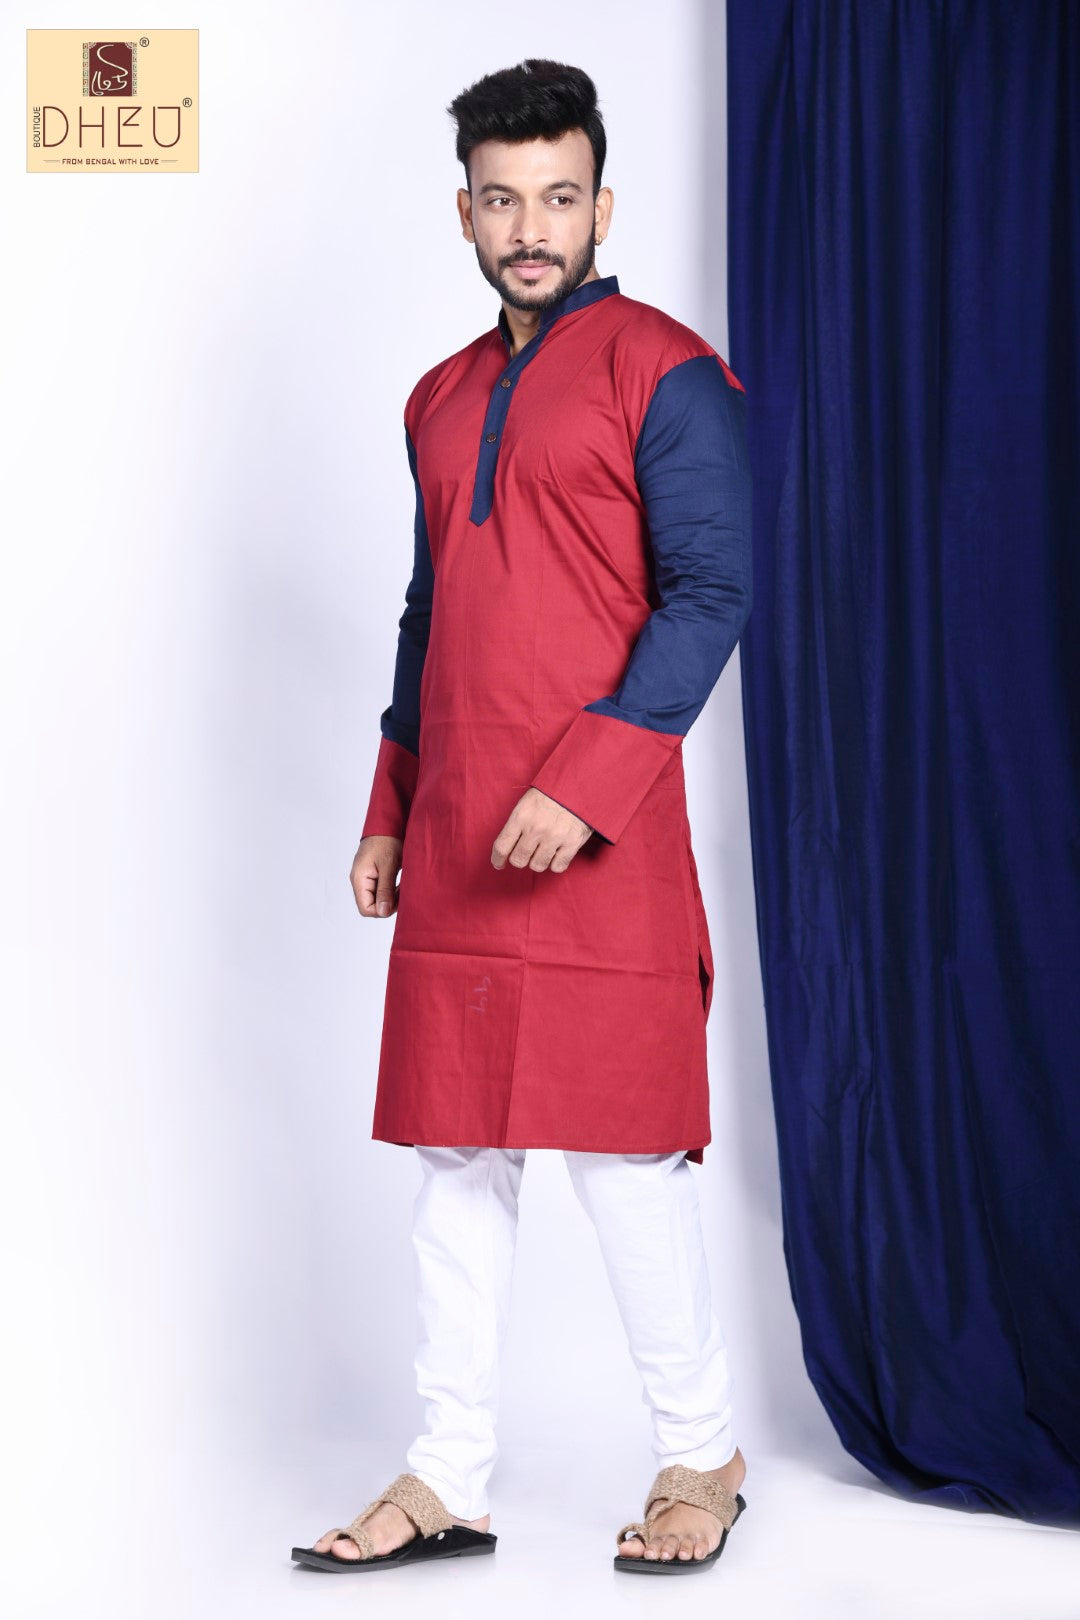 Vibrant  red blue designer kurta at low cost in dheu.in